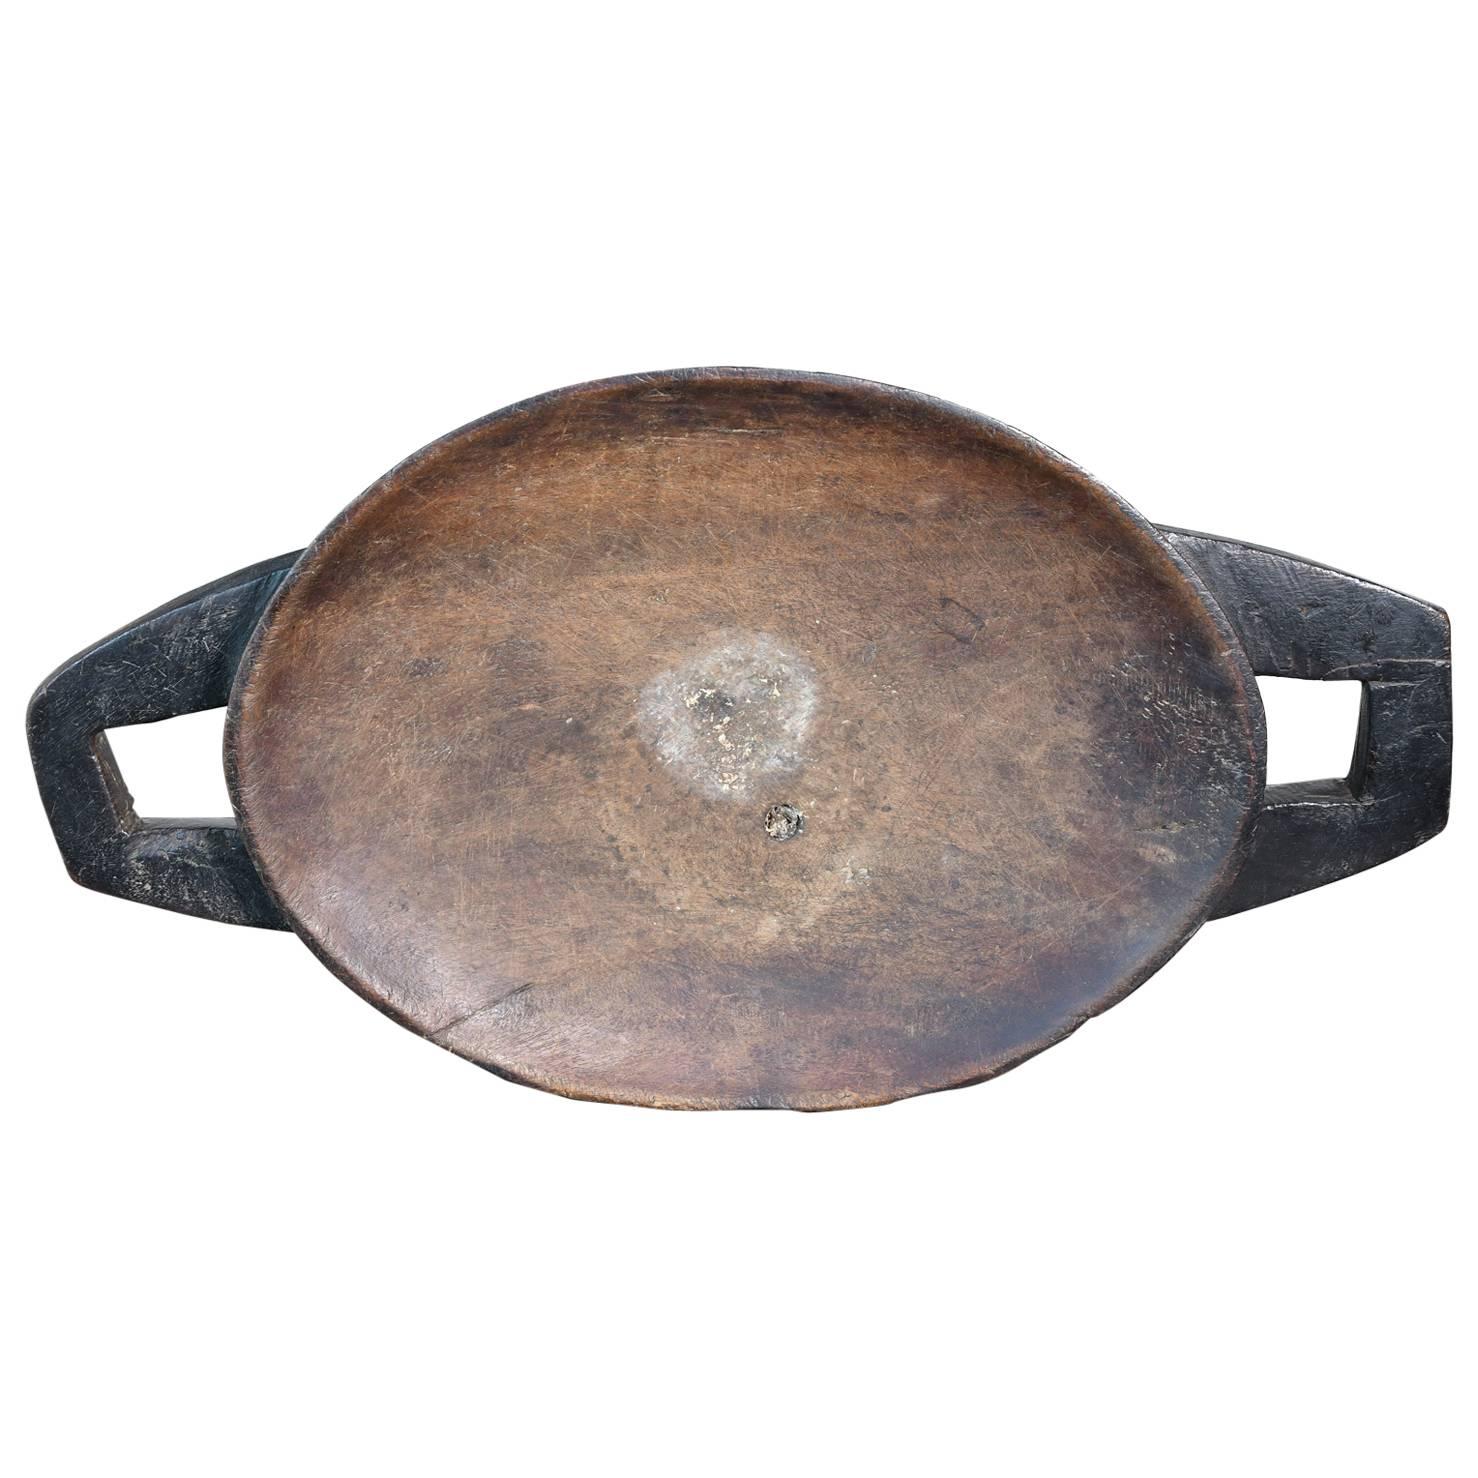 Traditional Primitive African Tribal Zulu Meat Tray From South Africa